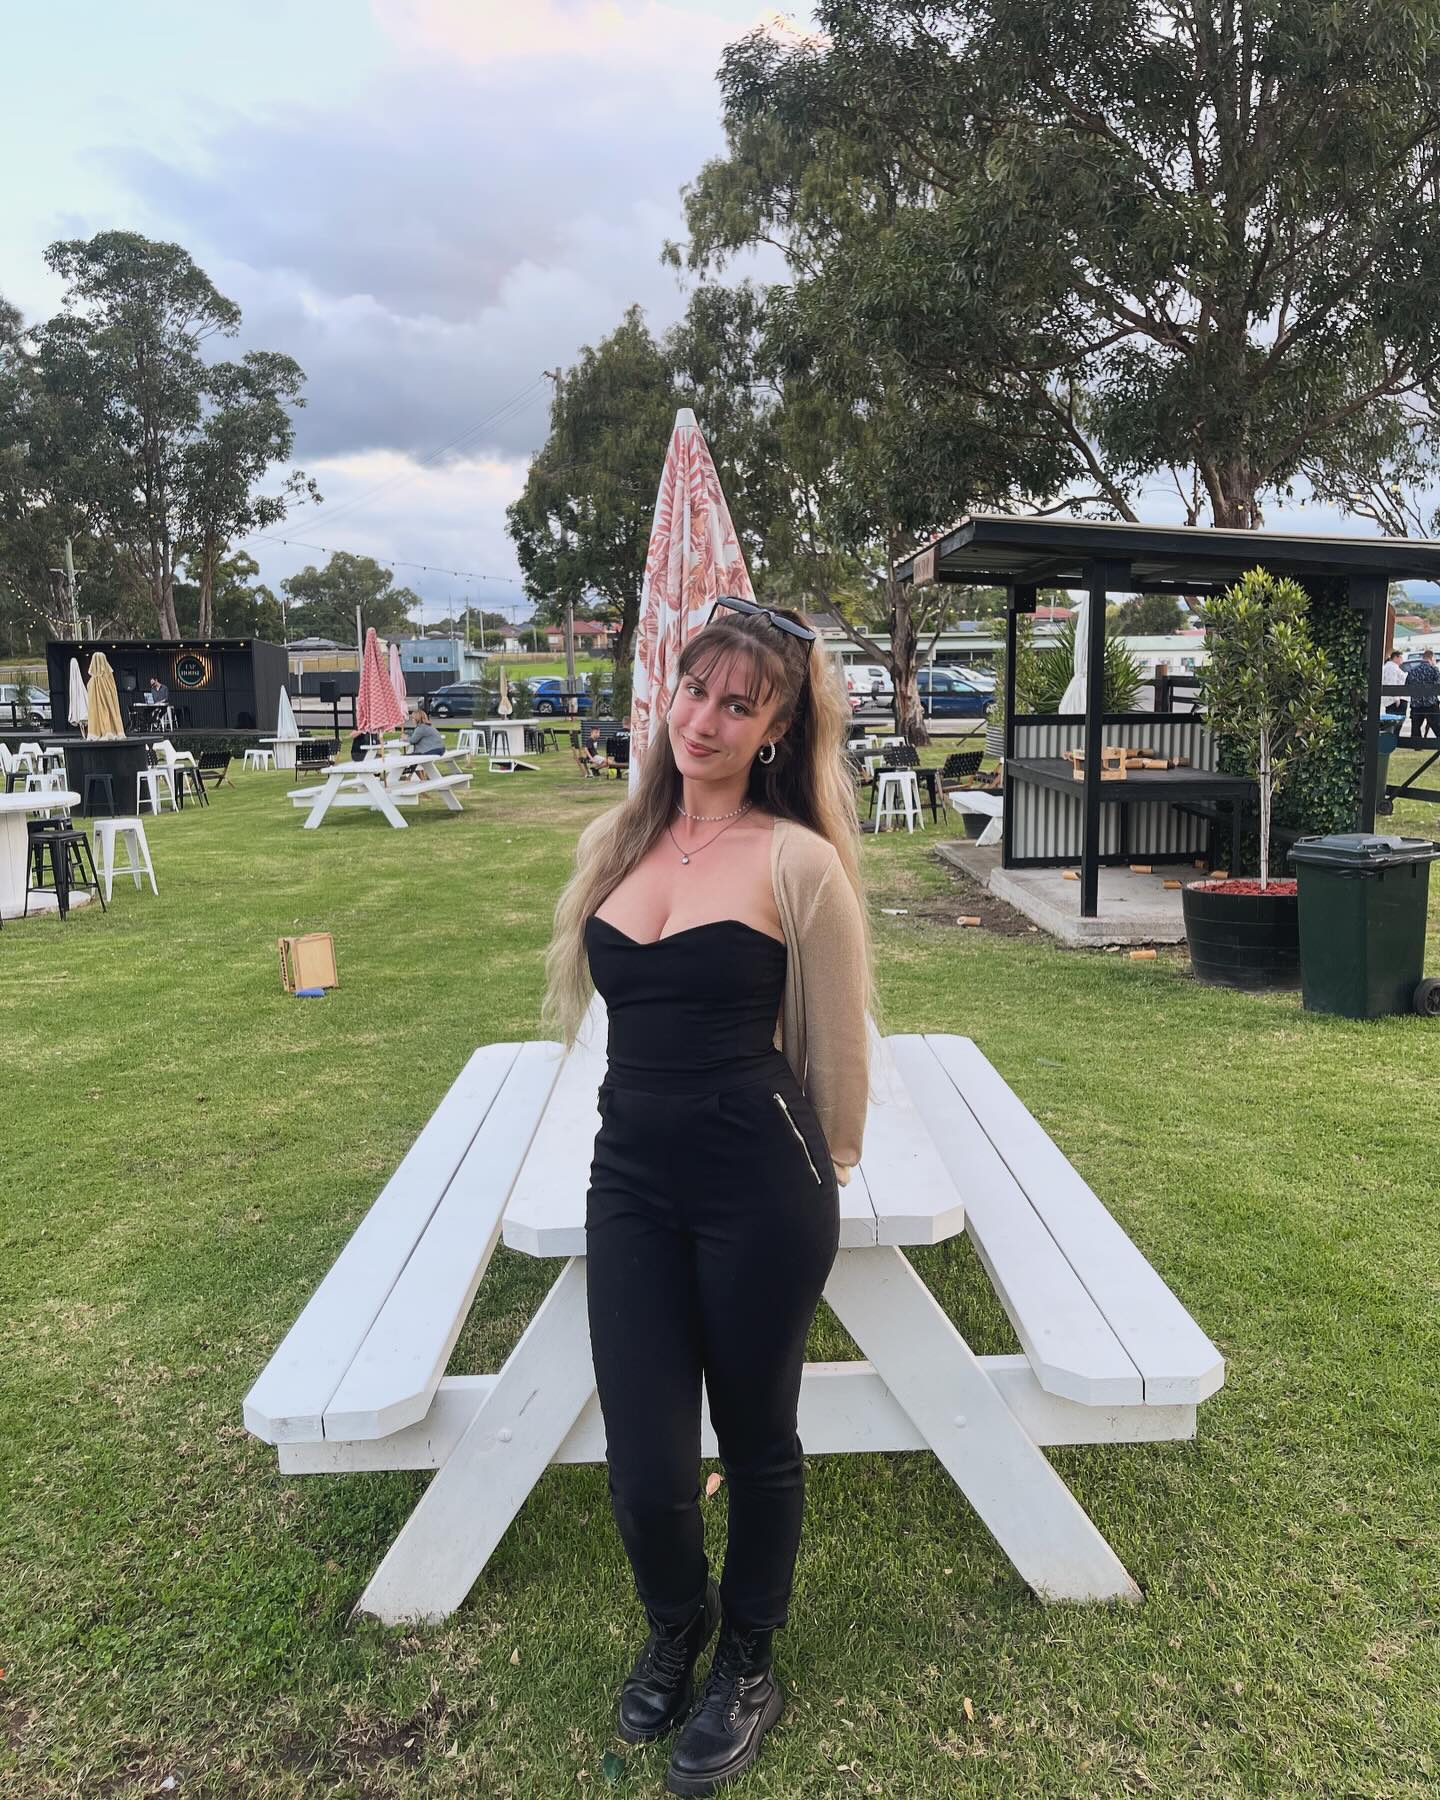 Celebrating my Dads 50th 🥳 
•
•
•
#party #uwugirl #cute #quirky #thiccc #queen #loveme #outfit #outfitideas #summer #imsocuteandquirky